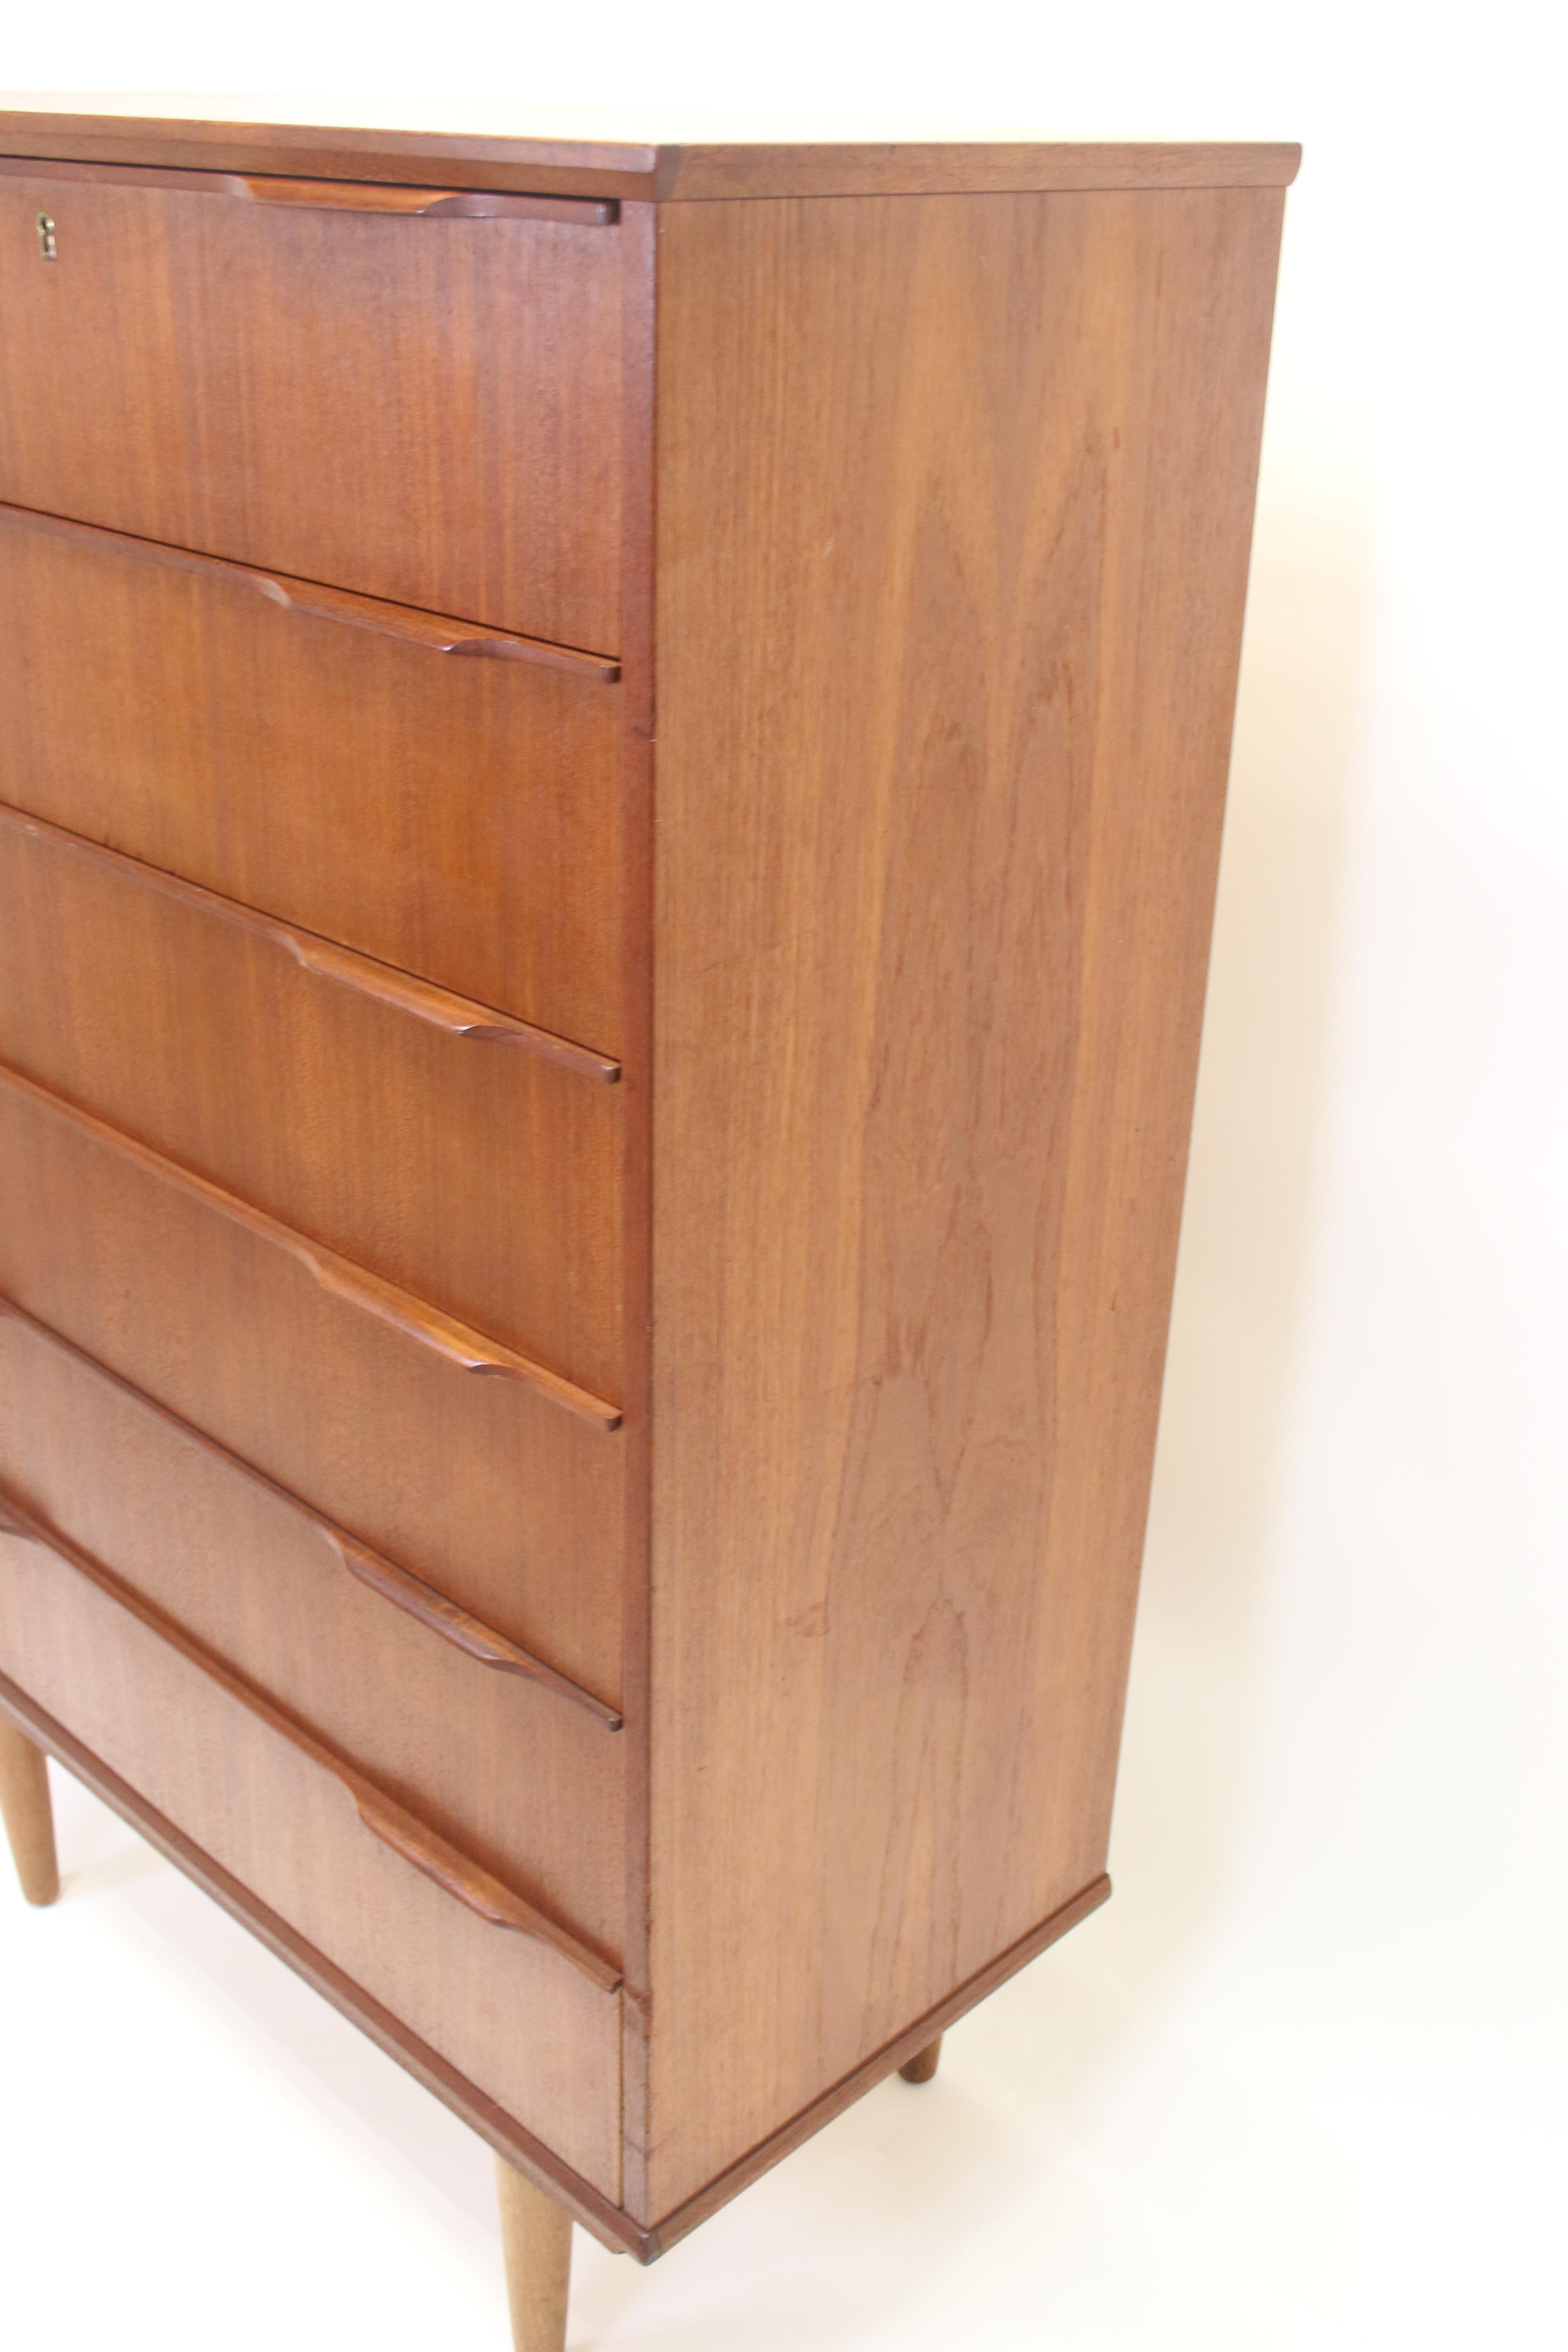 Danish Teak Chest of Drawers with 6 Drawers 6